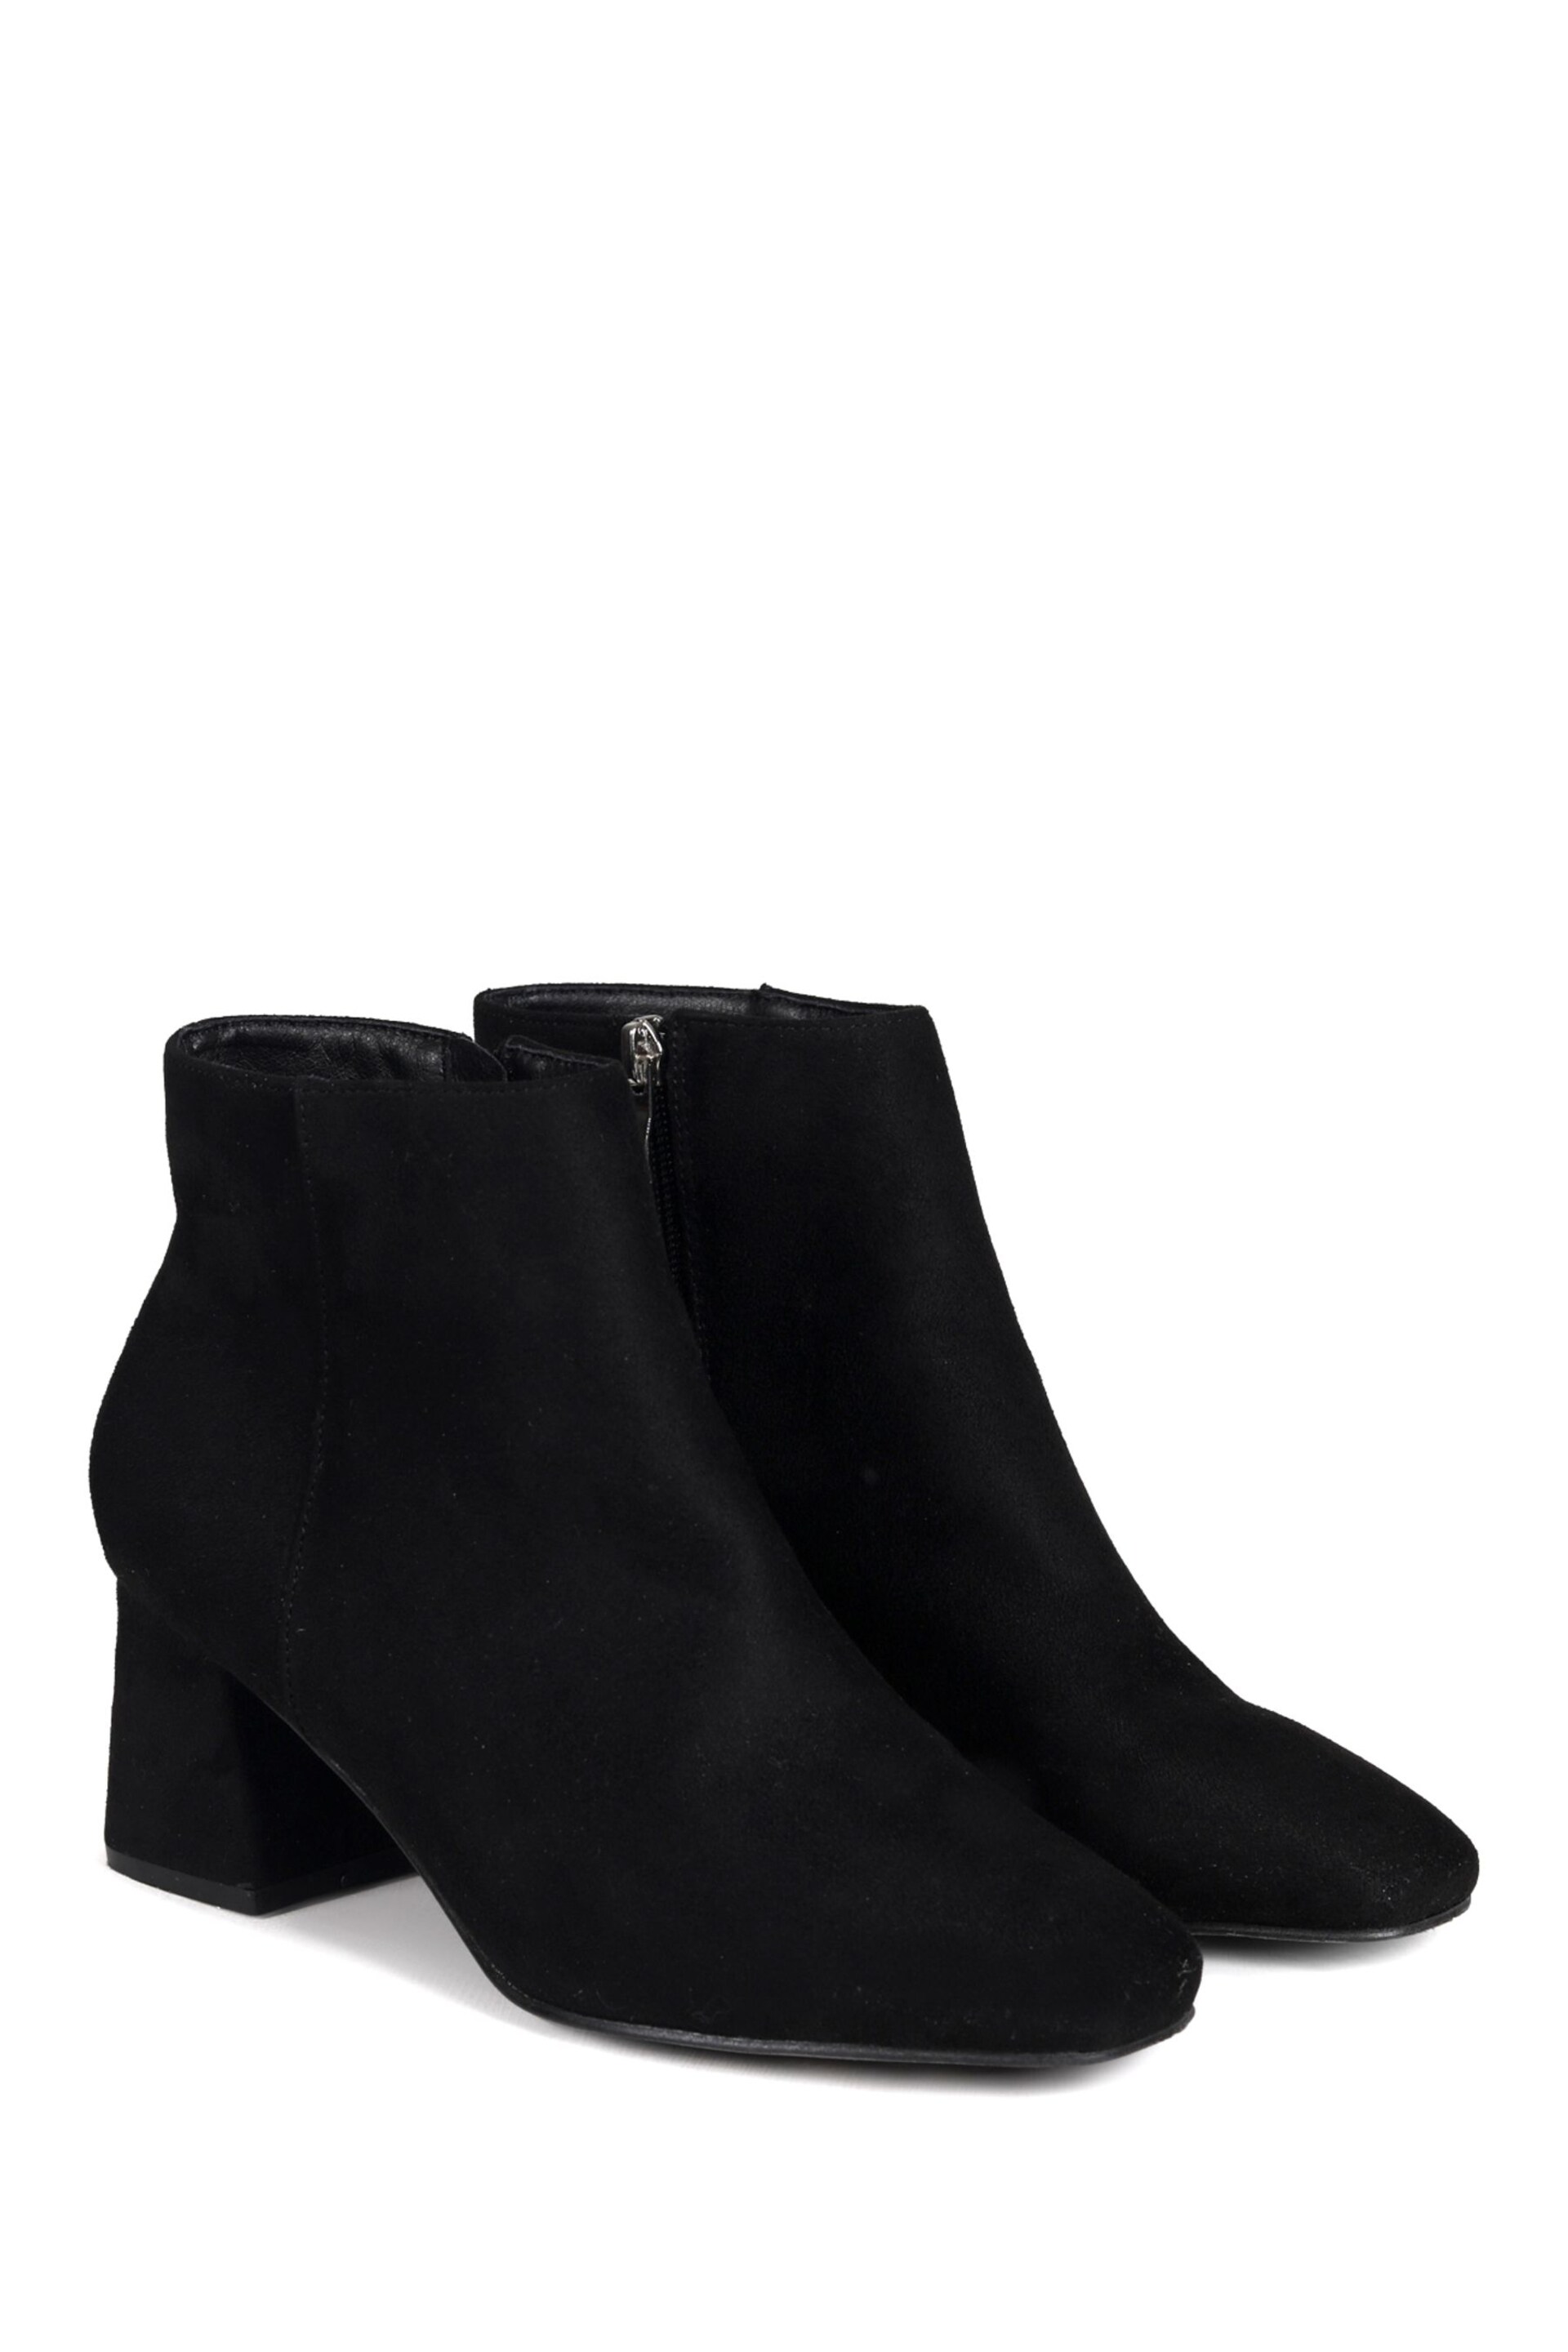 Linzi Black Suede Verse PU Block Heeled Ankle Boots - Image 3 of 4